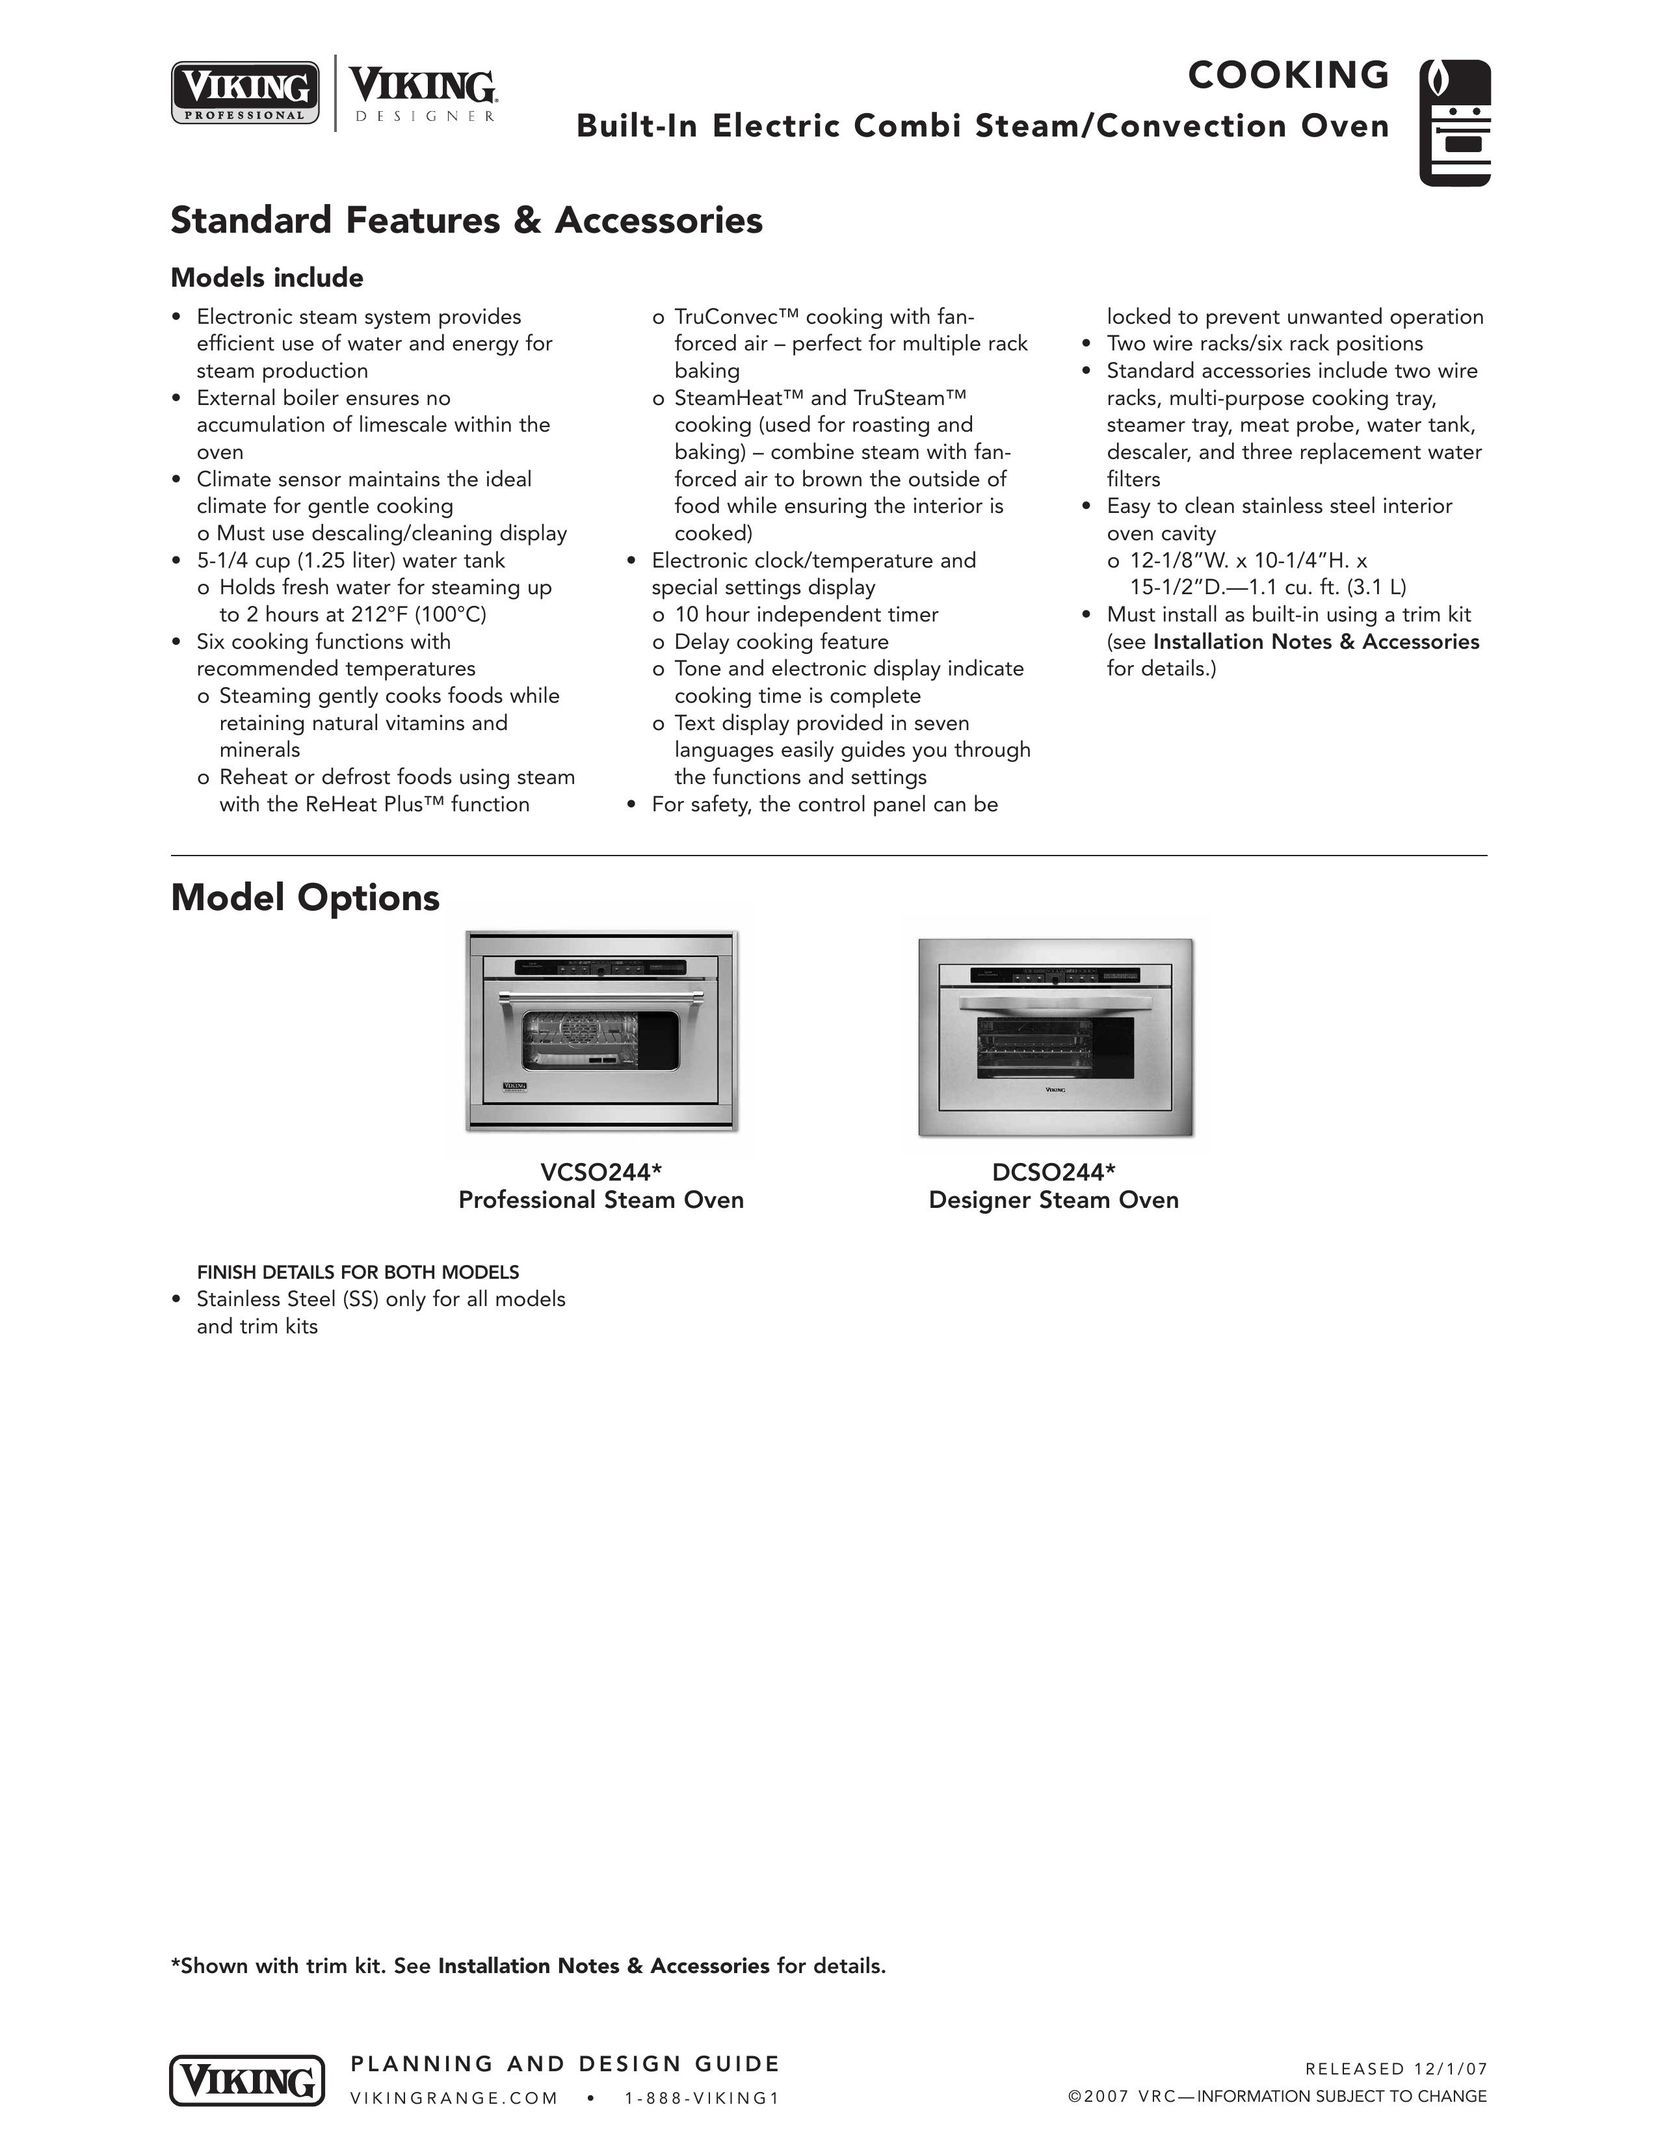 Viking DCSO244* Convection Oven User Manual